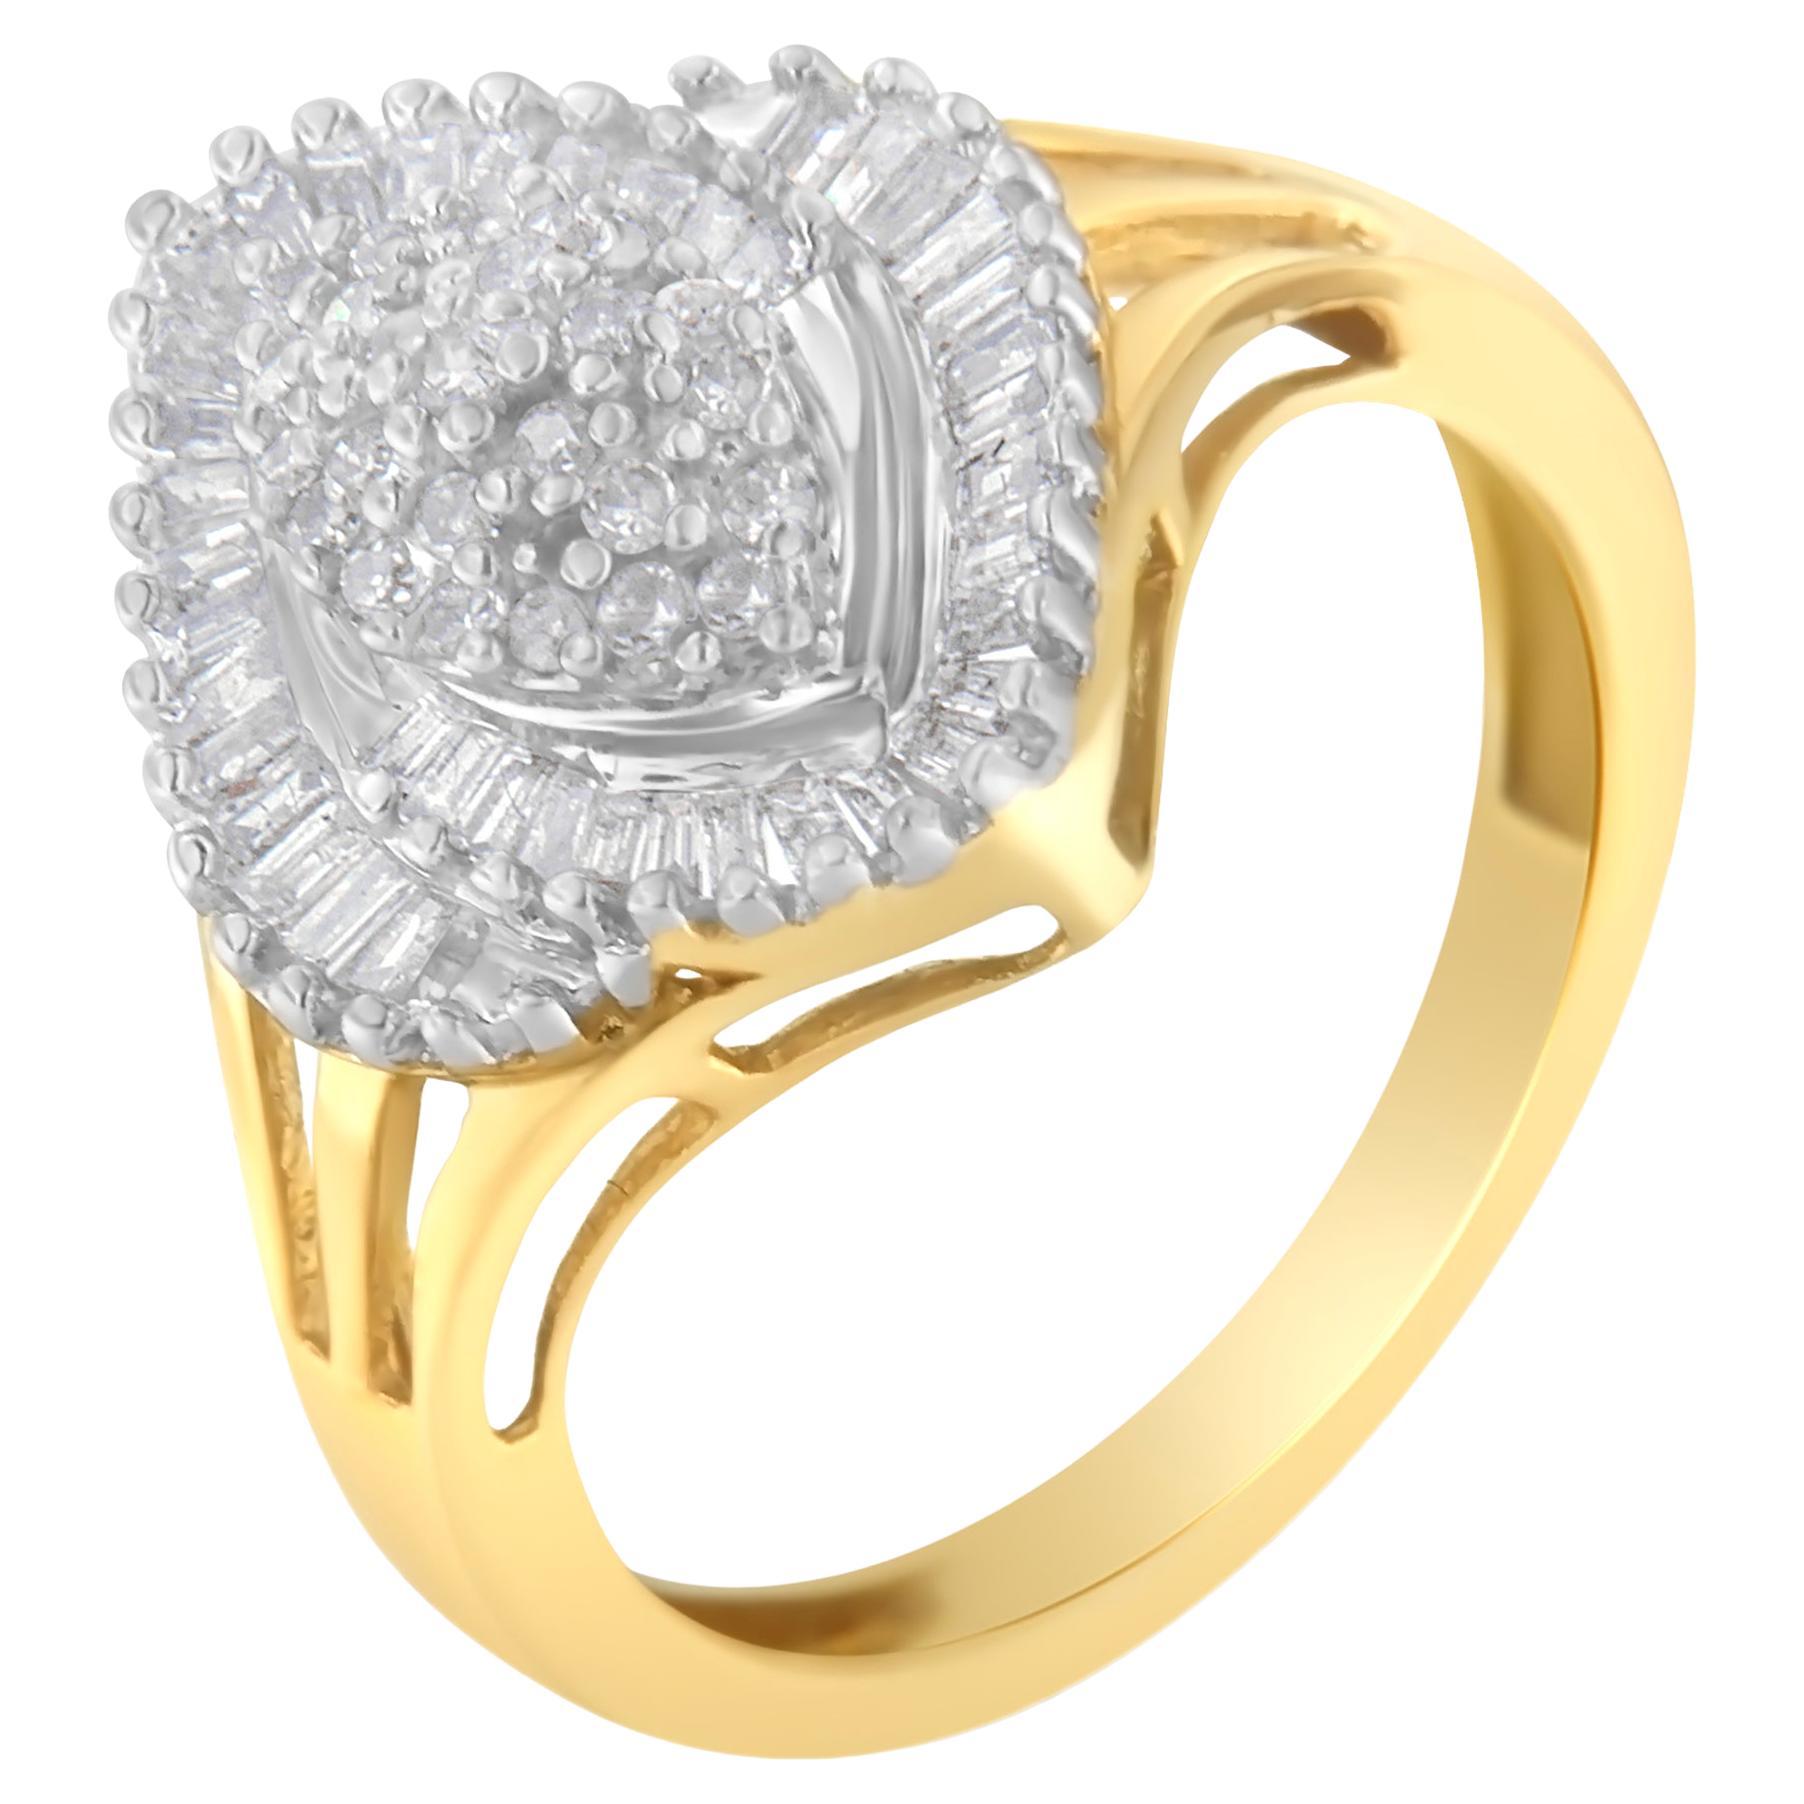 For Sale:  10K Yellow Gold 1/2 Carat Diamond Cocktail Ring